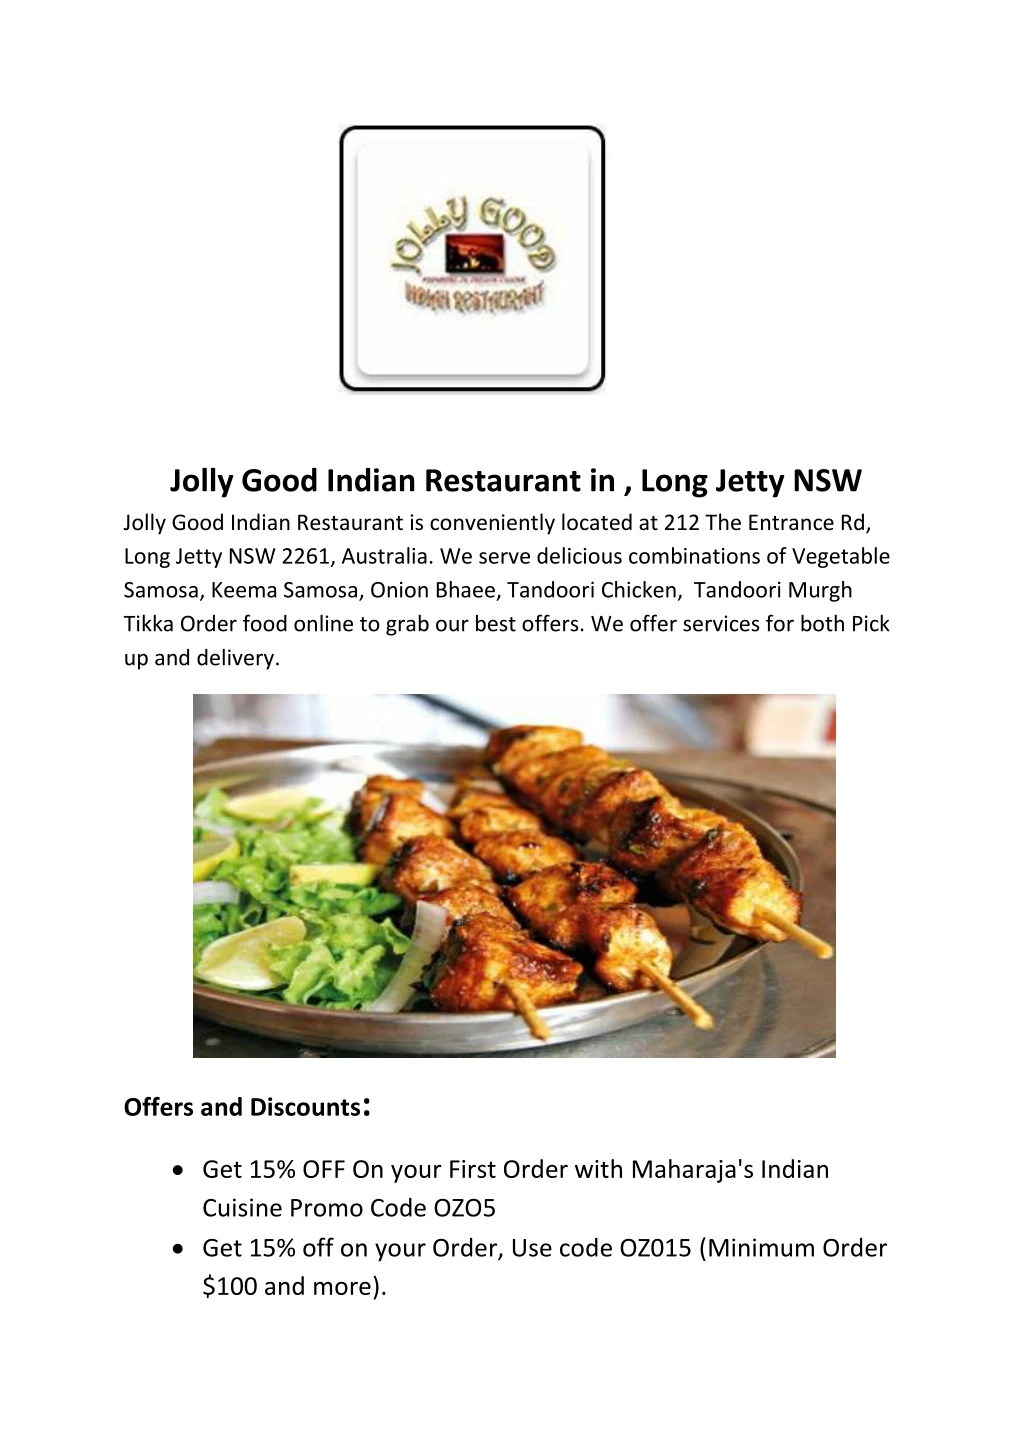 jolly good indian restaurant in long jetty nsw